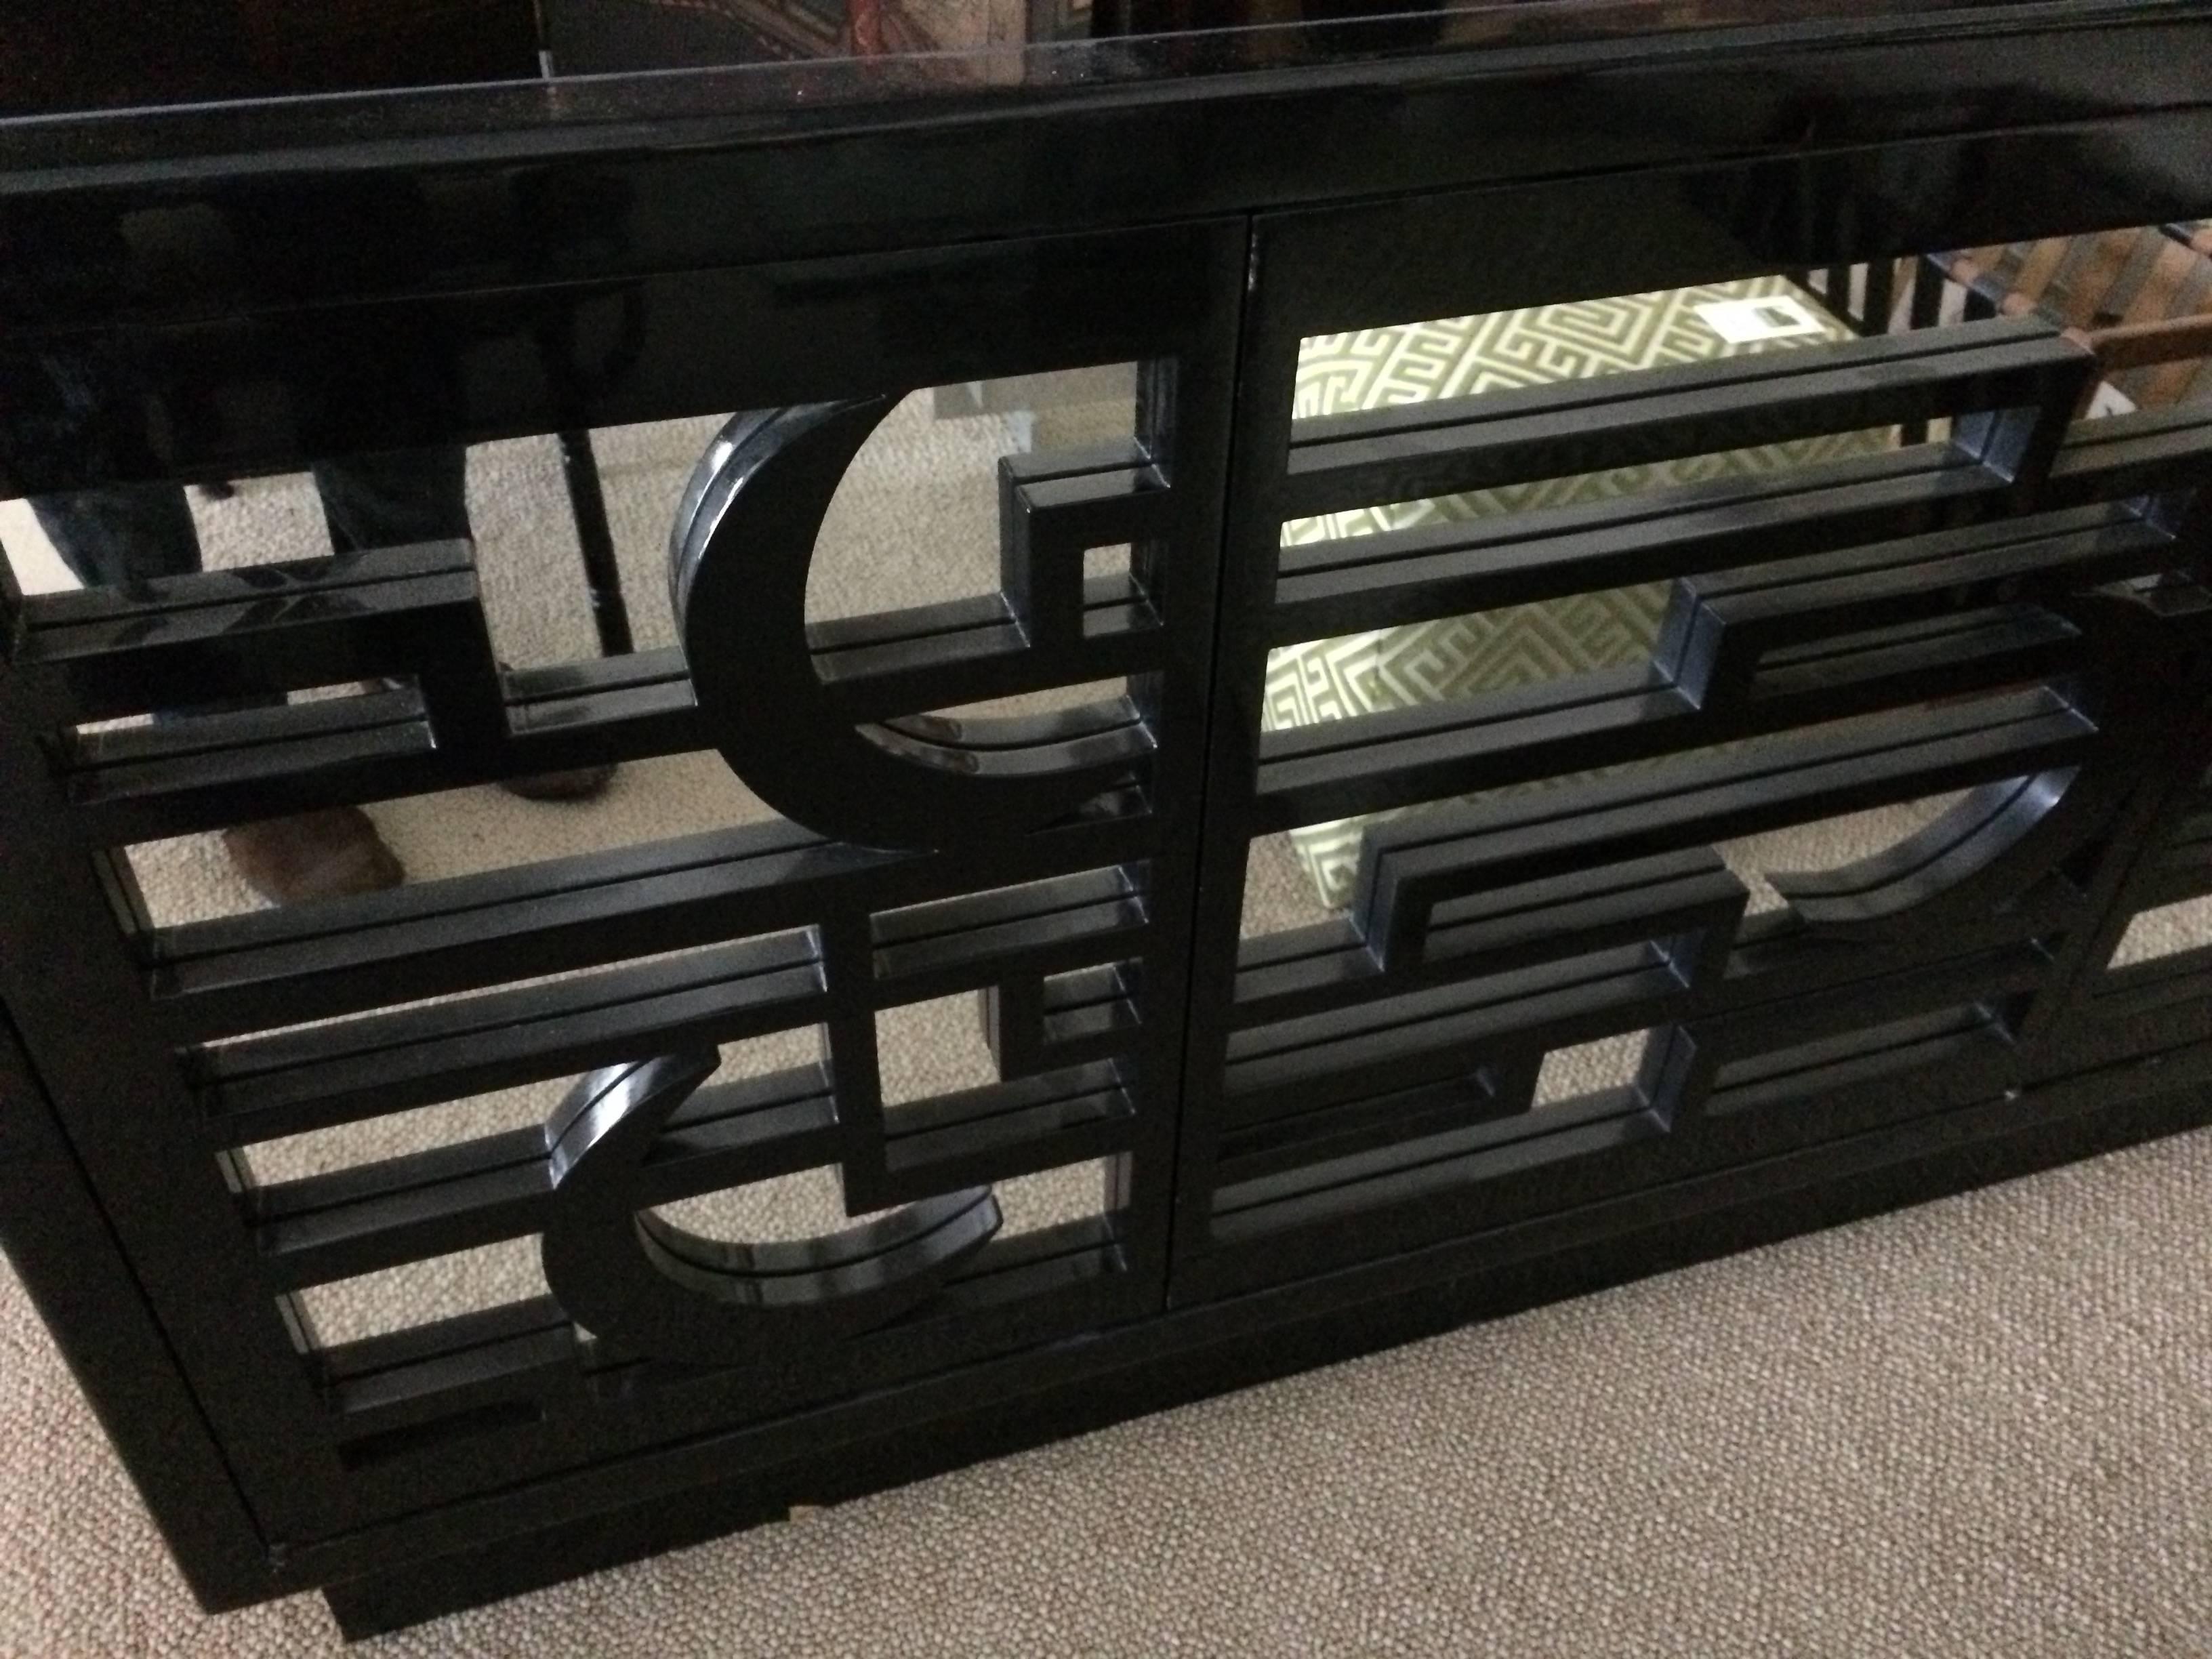 Fabulous black lacquer and mirrored credenza or sideboard. The front three doors and side panels have recessed mirror and black geometric fretwork. Black glass top is inset. Lots of storage inside including adjustable shelves and some drawers.